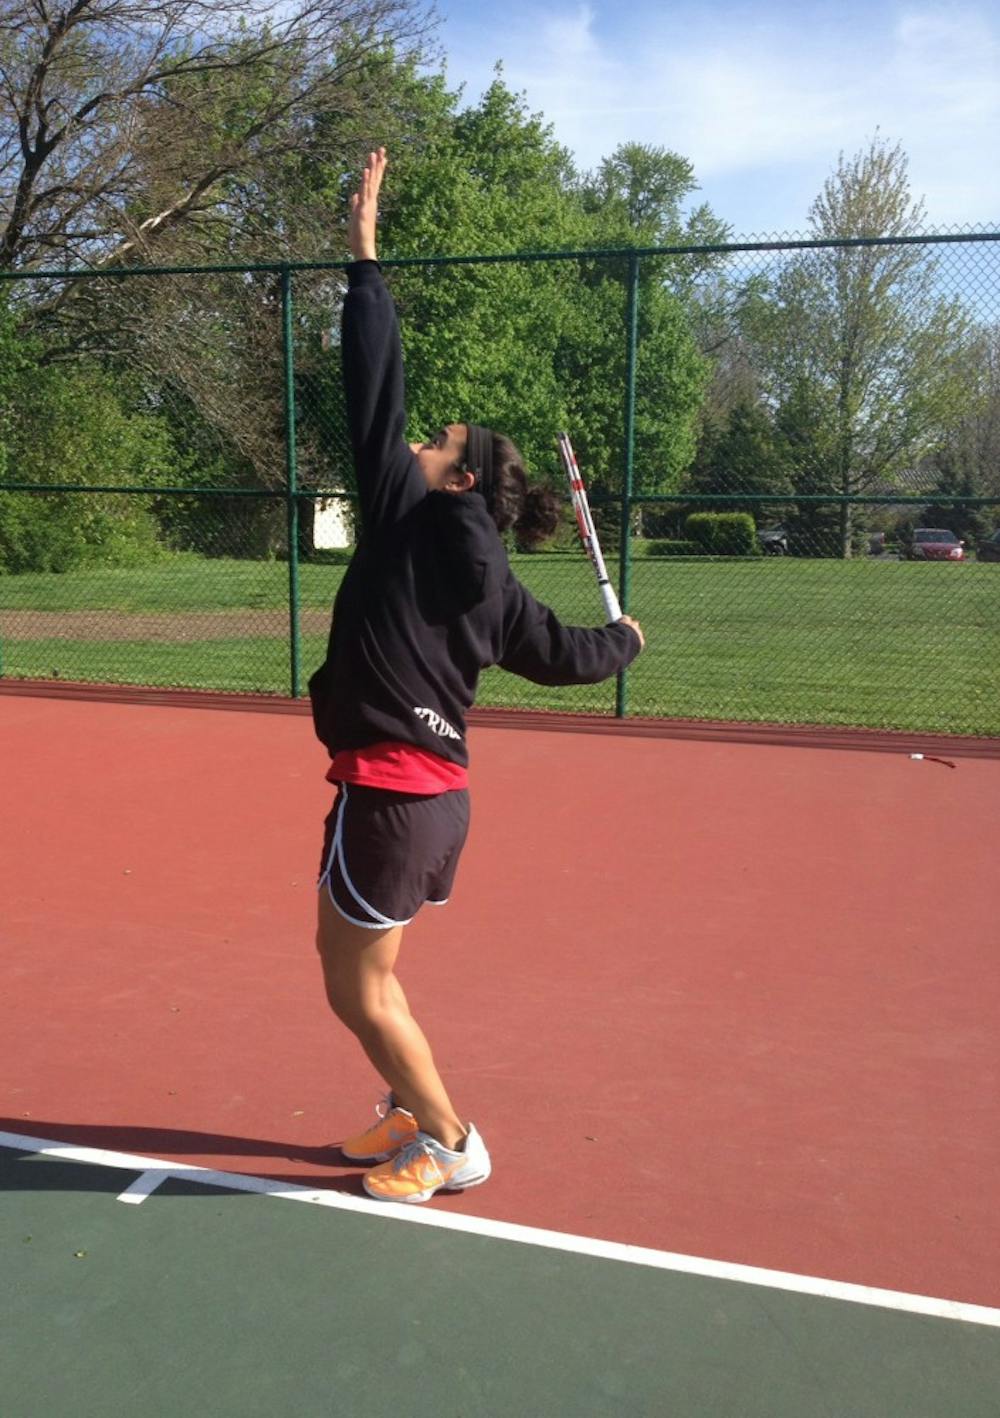 <p>Sammi Kruger has overcome a deficiency preventing her from digesting sugars to become one of the stars on Otterbein's tennis team</p>